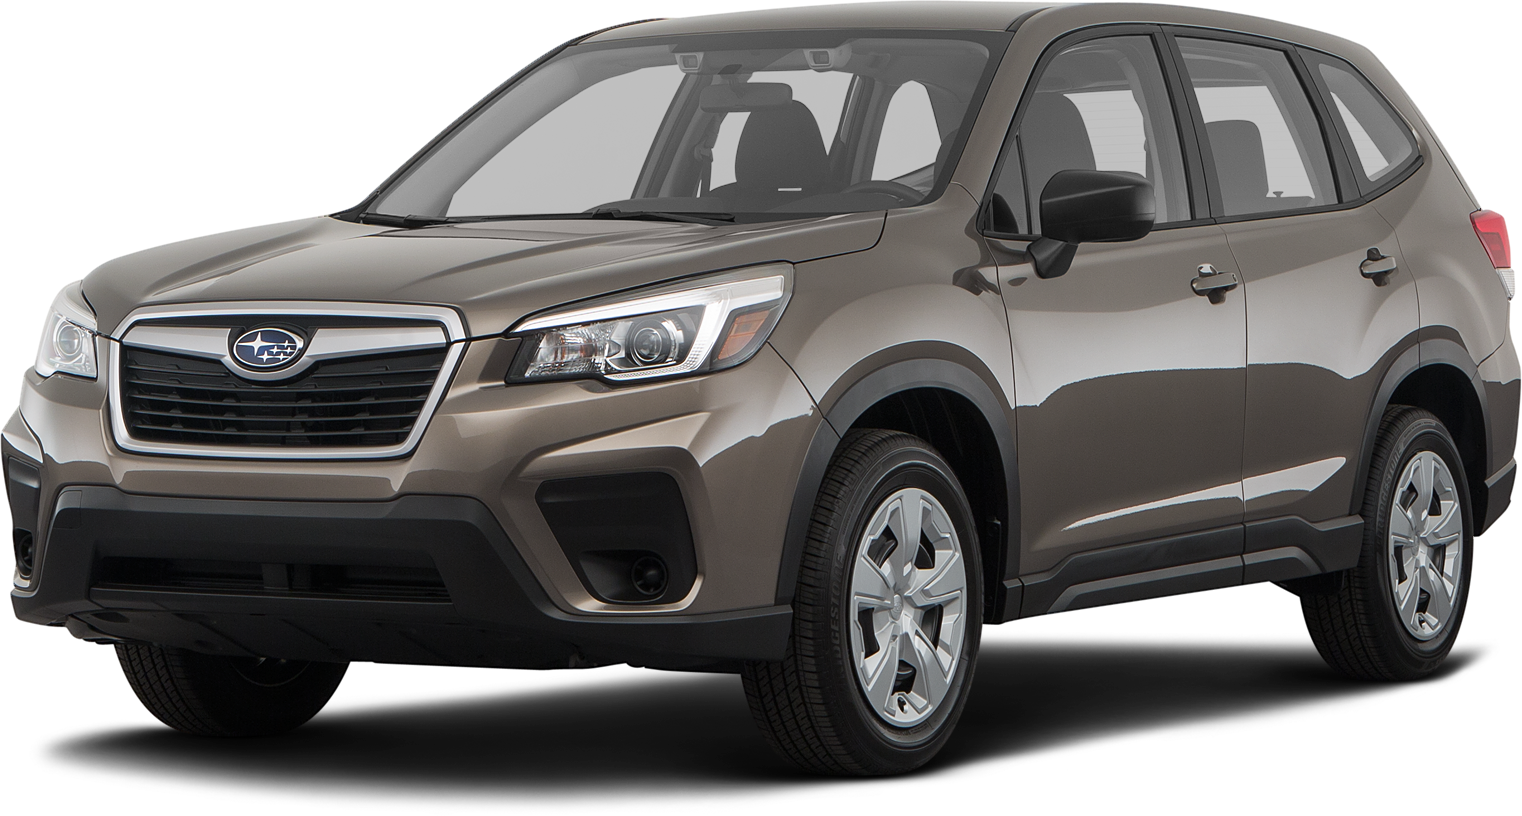 Subaru Forester PNG HD Quality